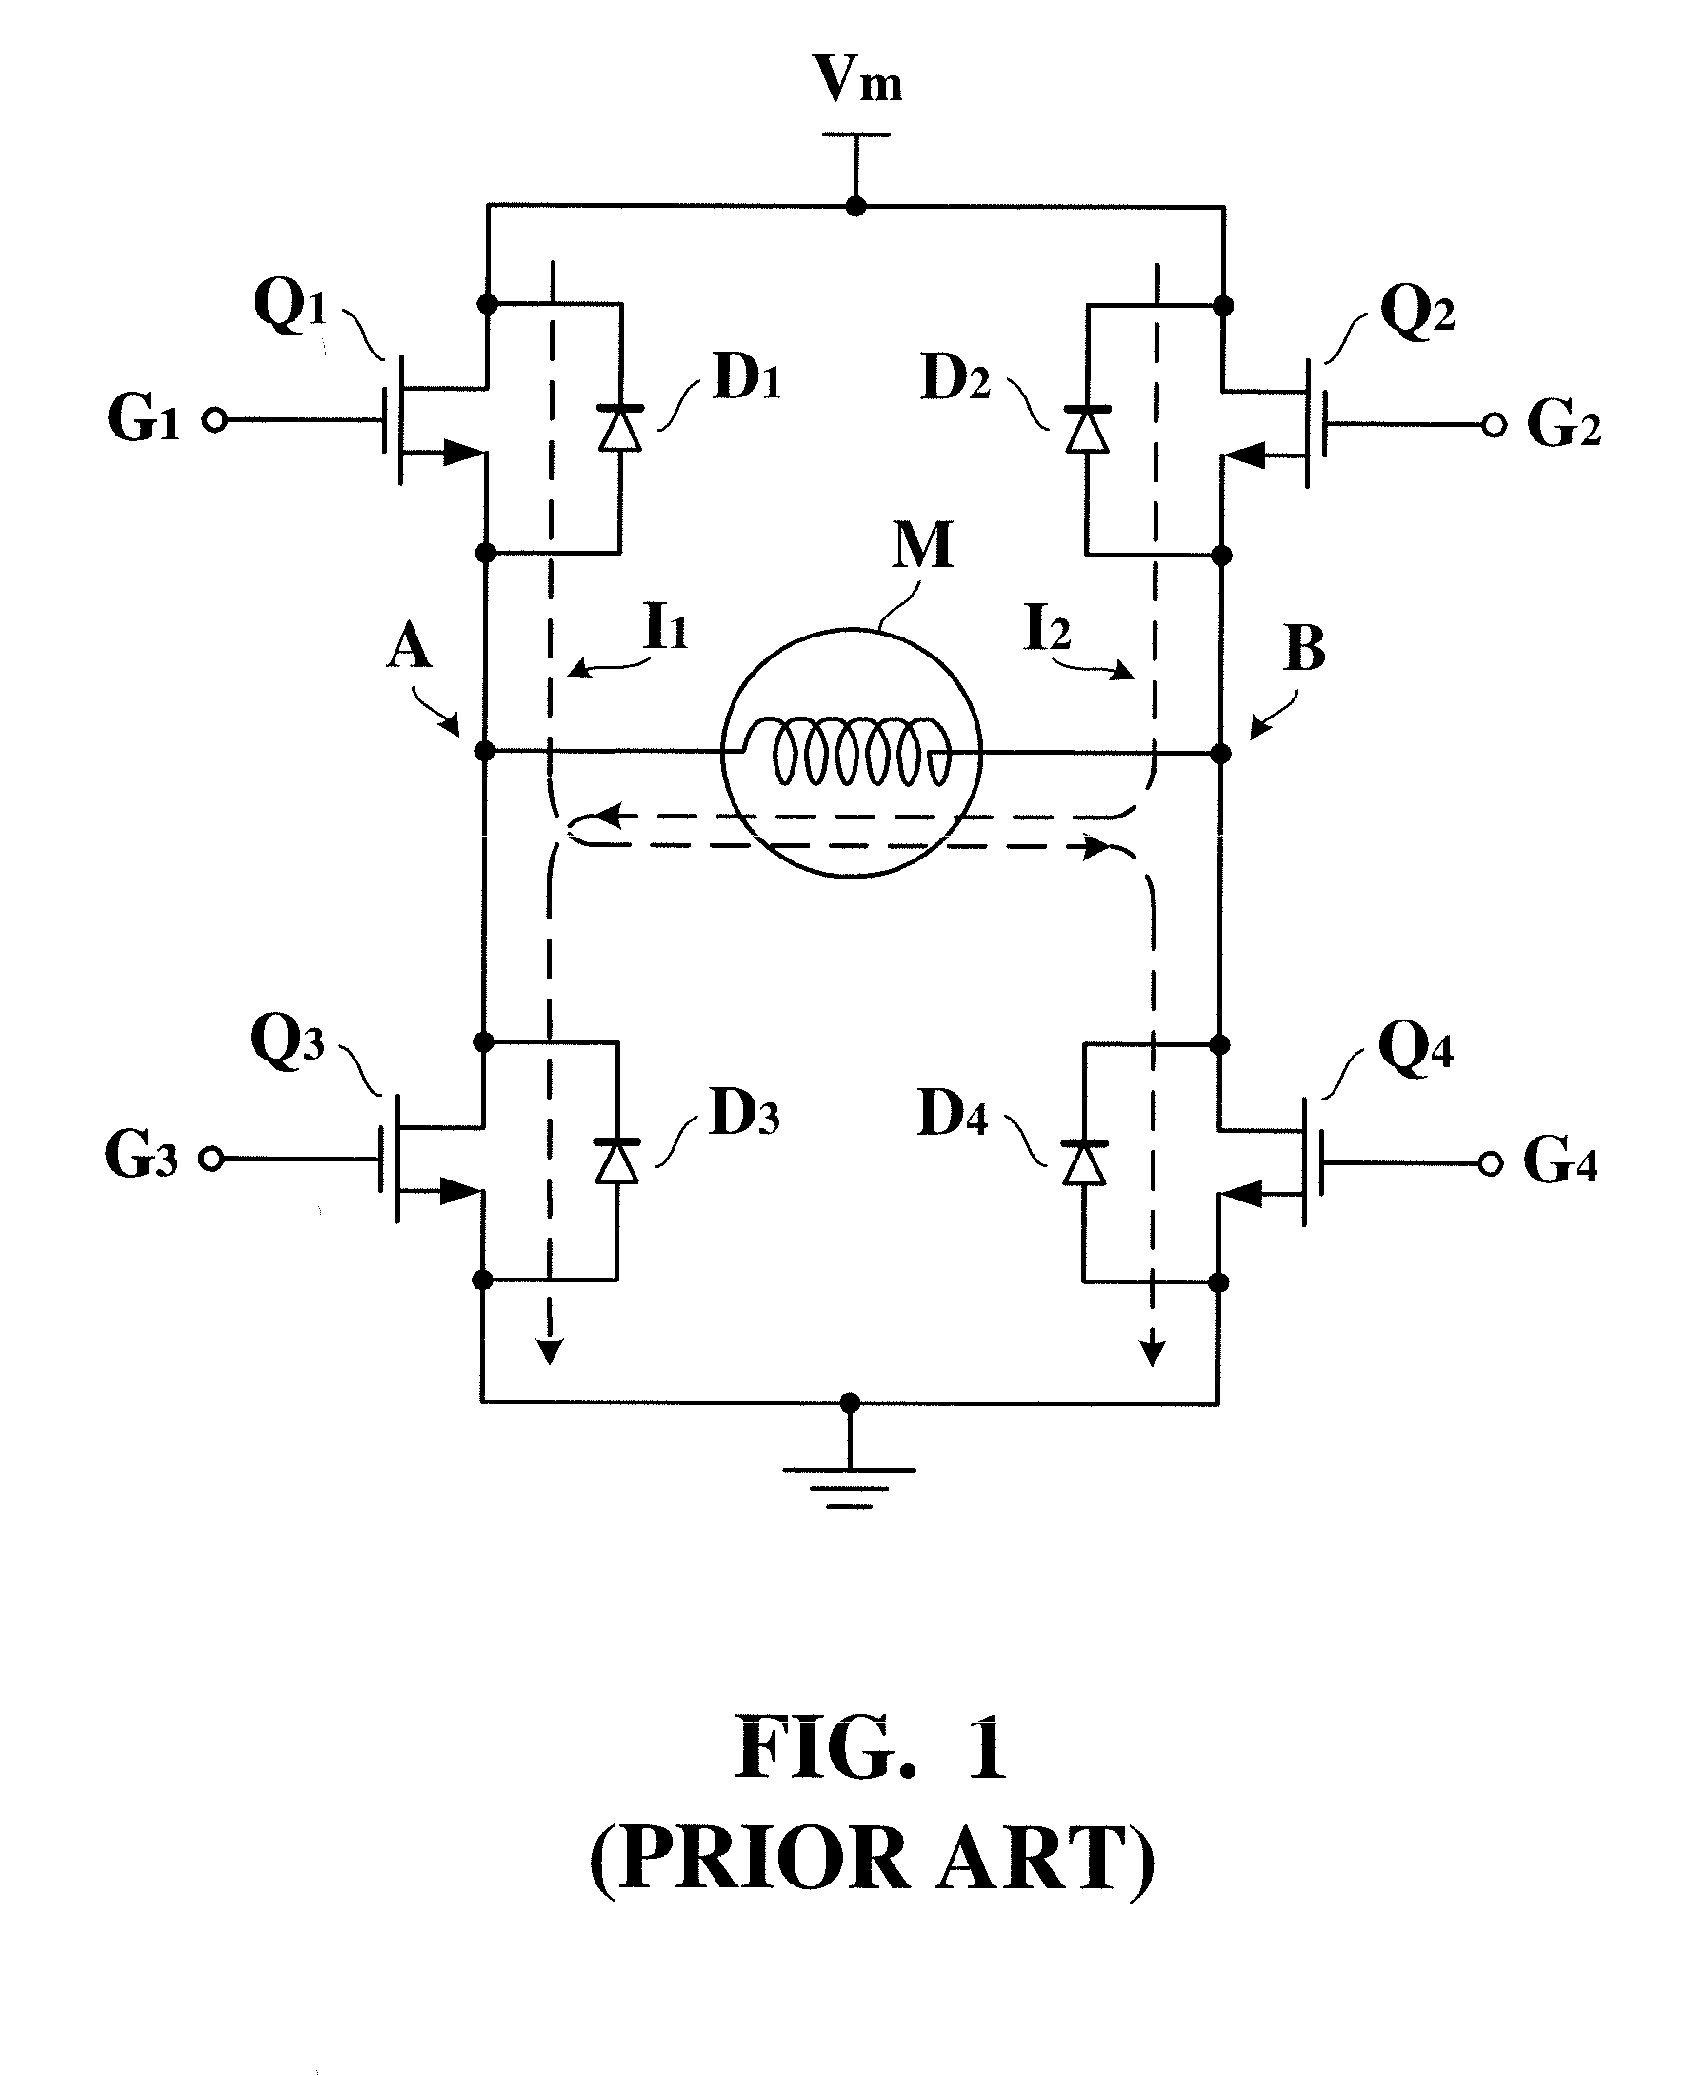 Motor control circuit for supplying a controllable driving current